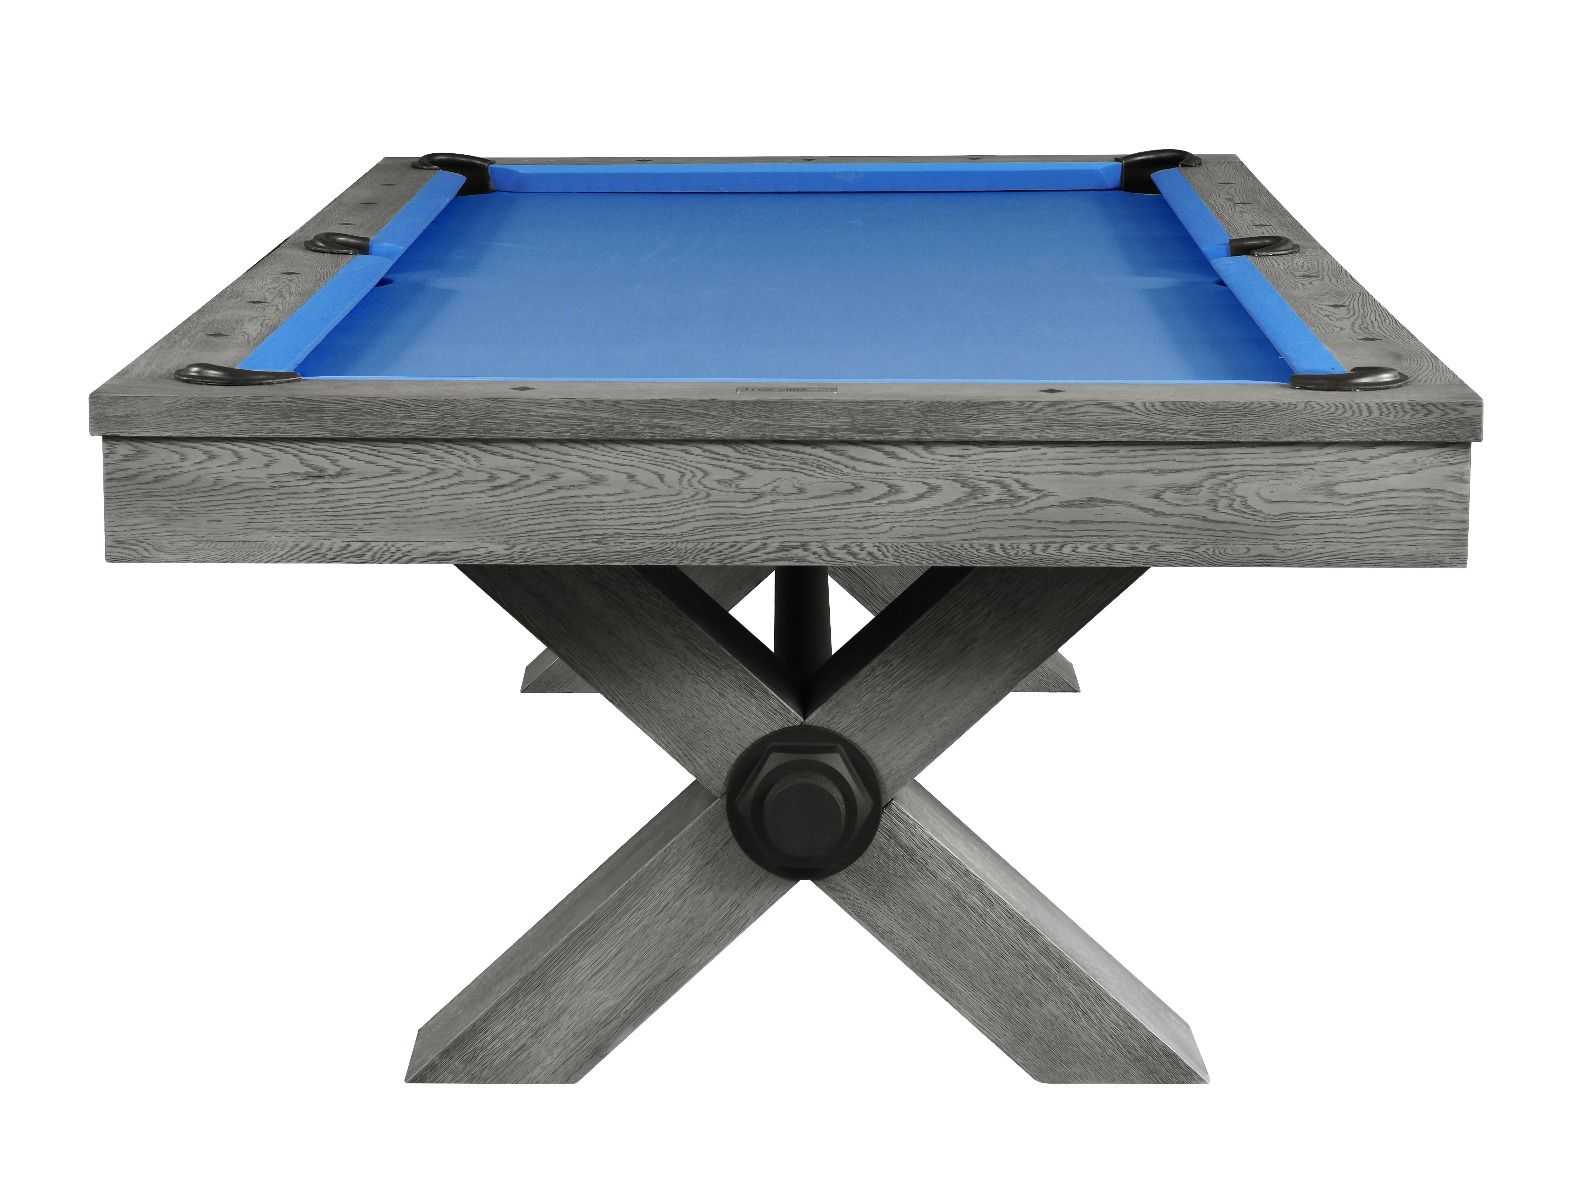 Plank and Hide, Vox Wood Pool Table